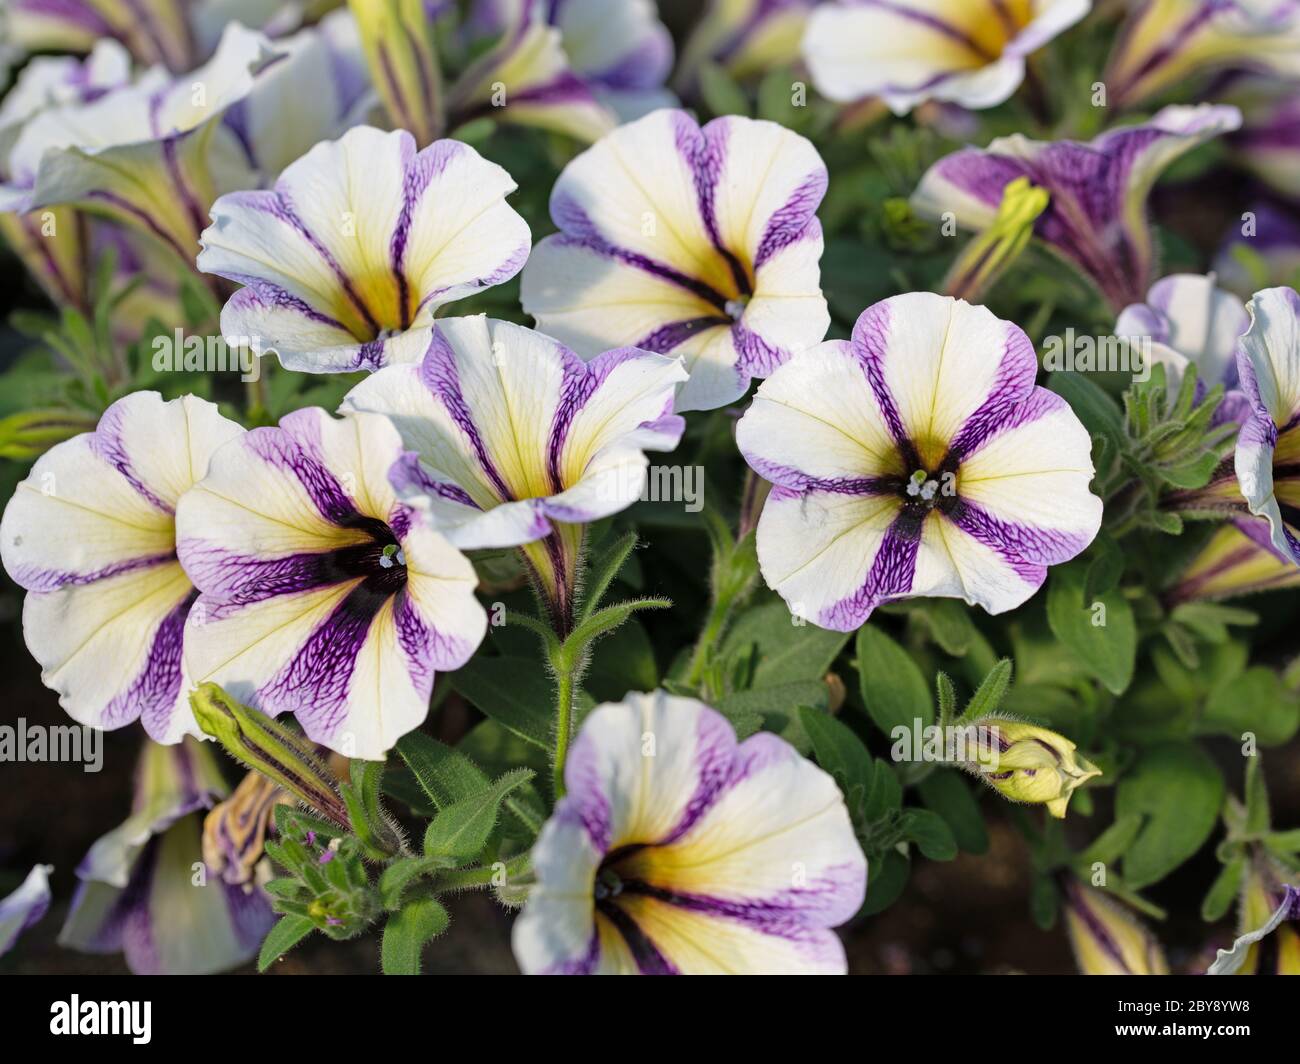 Flowering petunias in a close-up Stock Photo